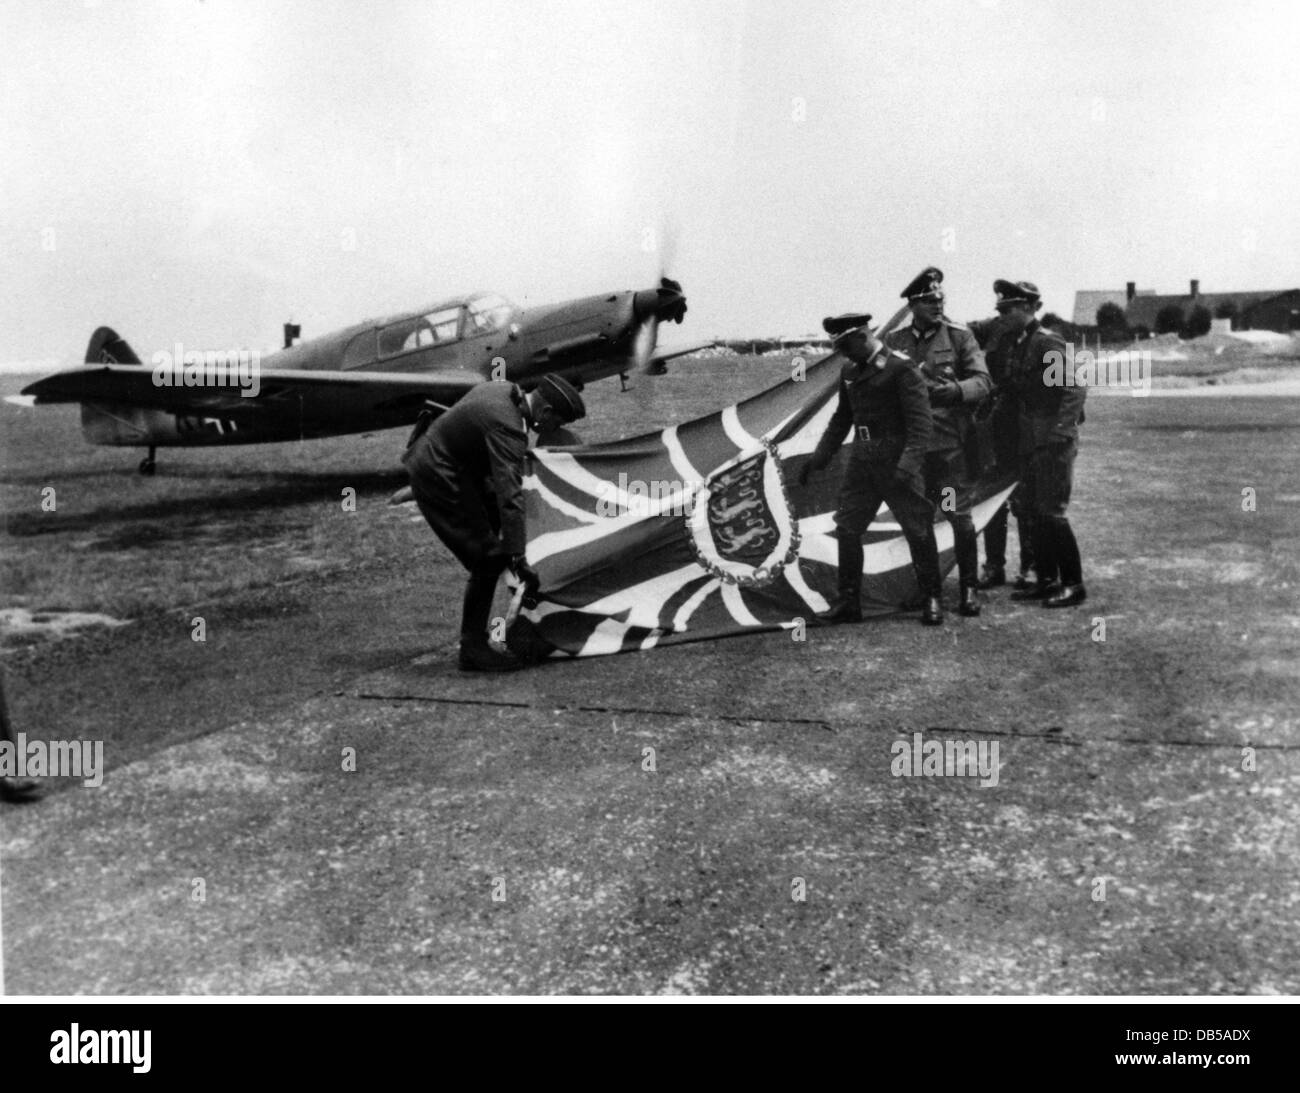 events, Second World War / WWII, Channel Islands, Guernsey, German soldiers with a captured British flag, summer 1940, Great Britain, England, Island, 20th century, historic, historical, officers, uniform, uniforms, airfield, aircraft, Arado Ar 96, Ar96, Ar-96, Wehrmacht, Luftwaffe, people, 1940s, Additional-Rights-Clearences-Not Available Stock Photo